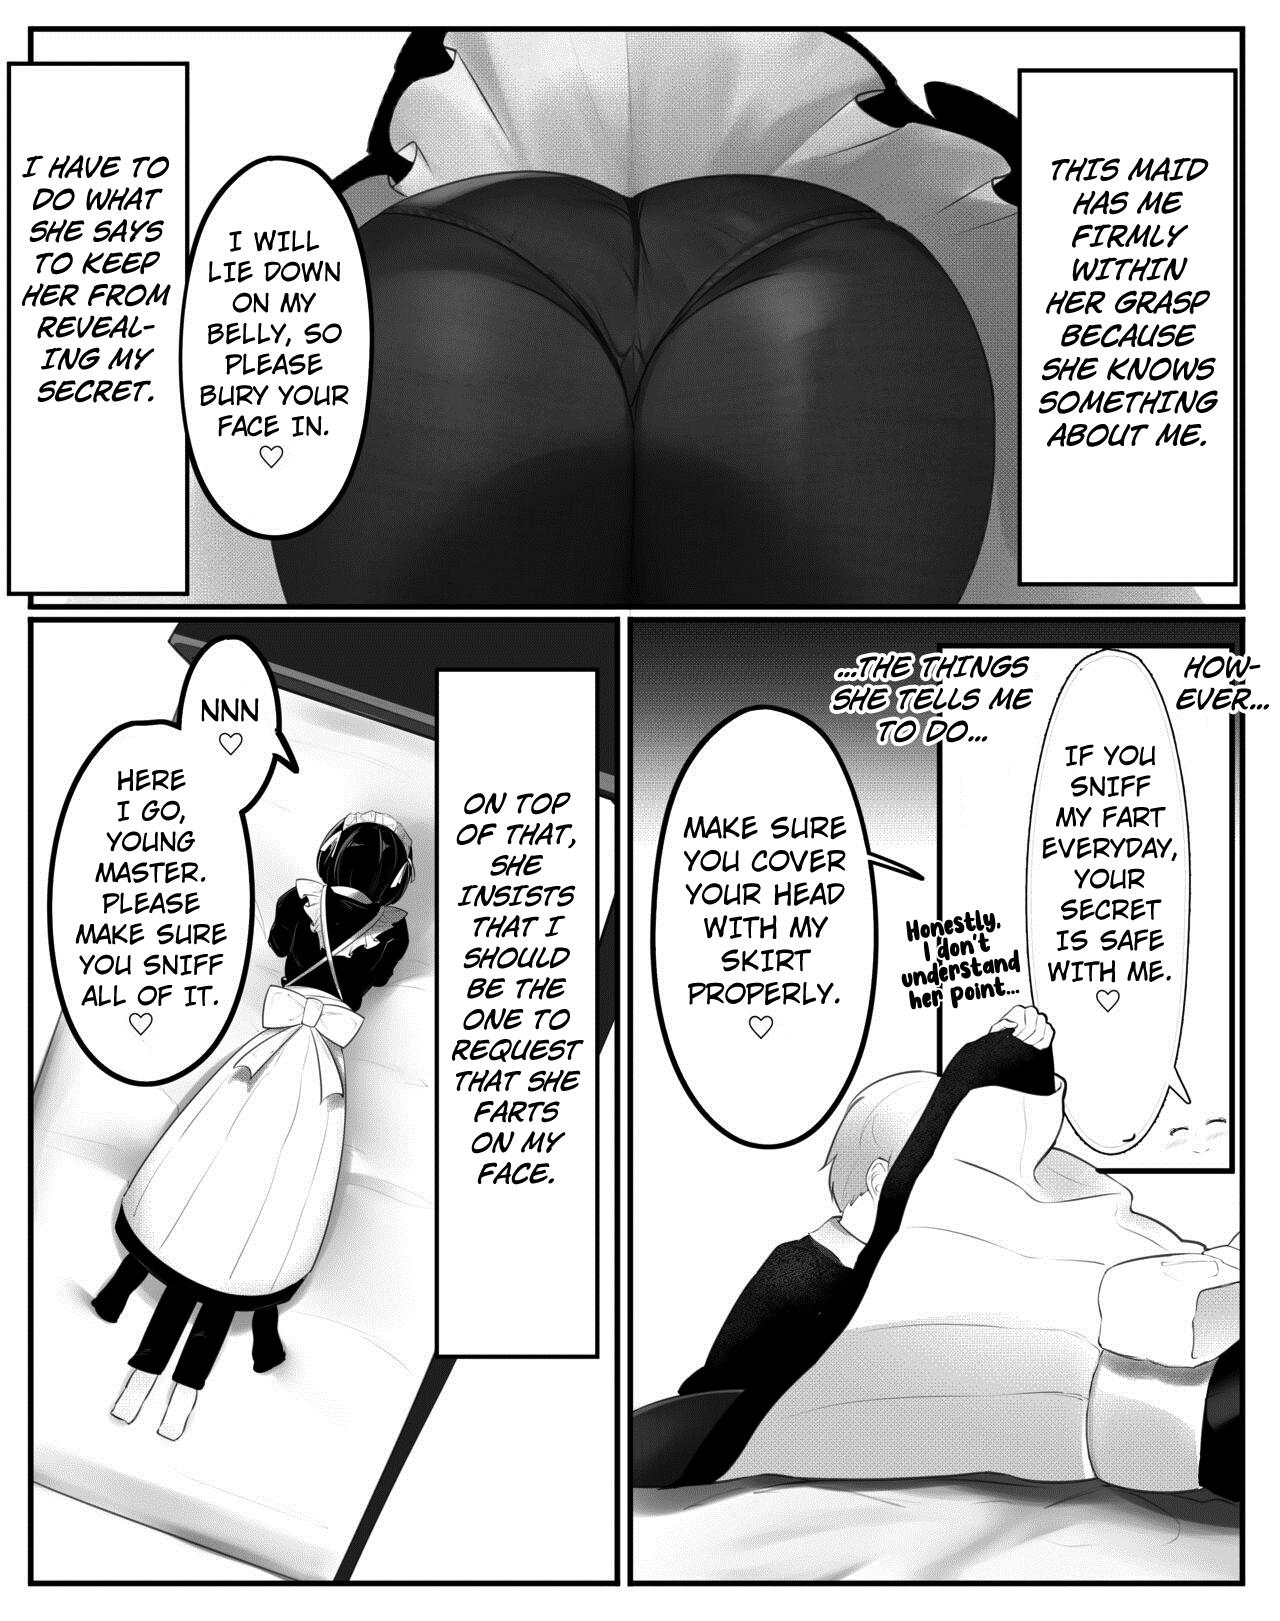 Best Blow Job Ever Onara Manga - Maid to Bocchama Real Orgasms - Picture 2